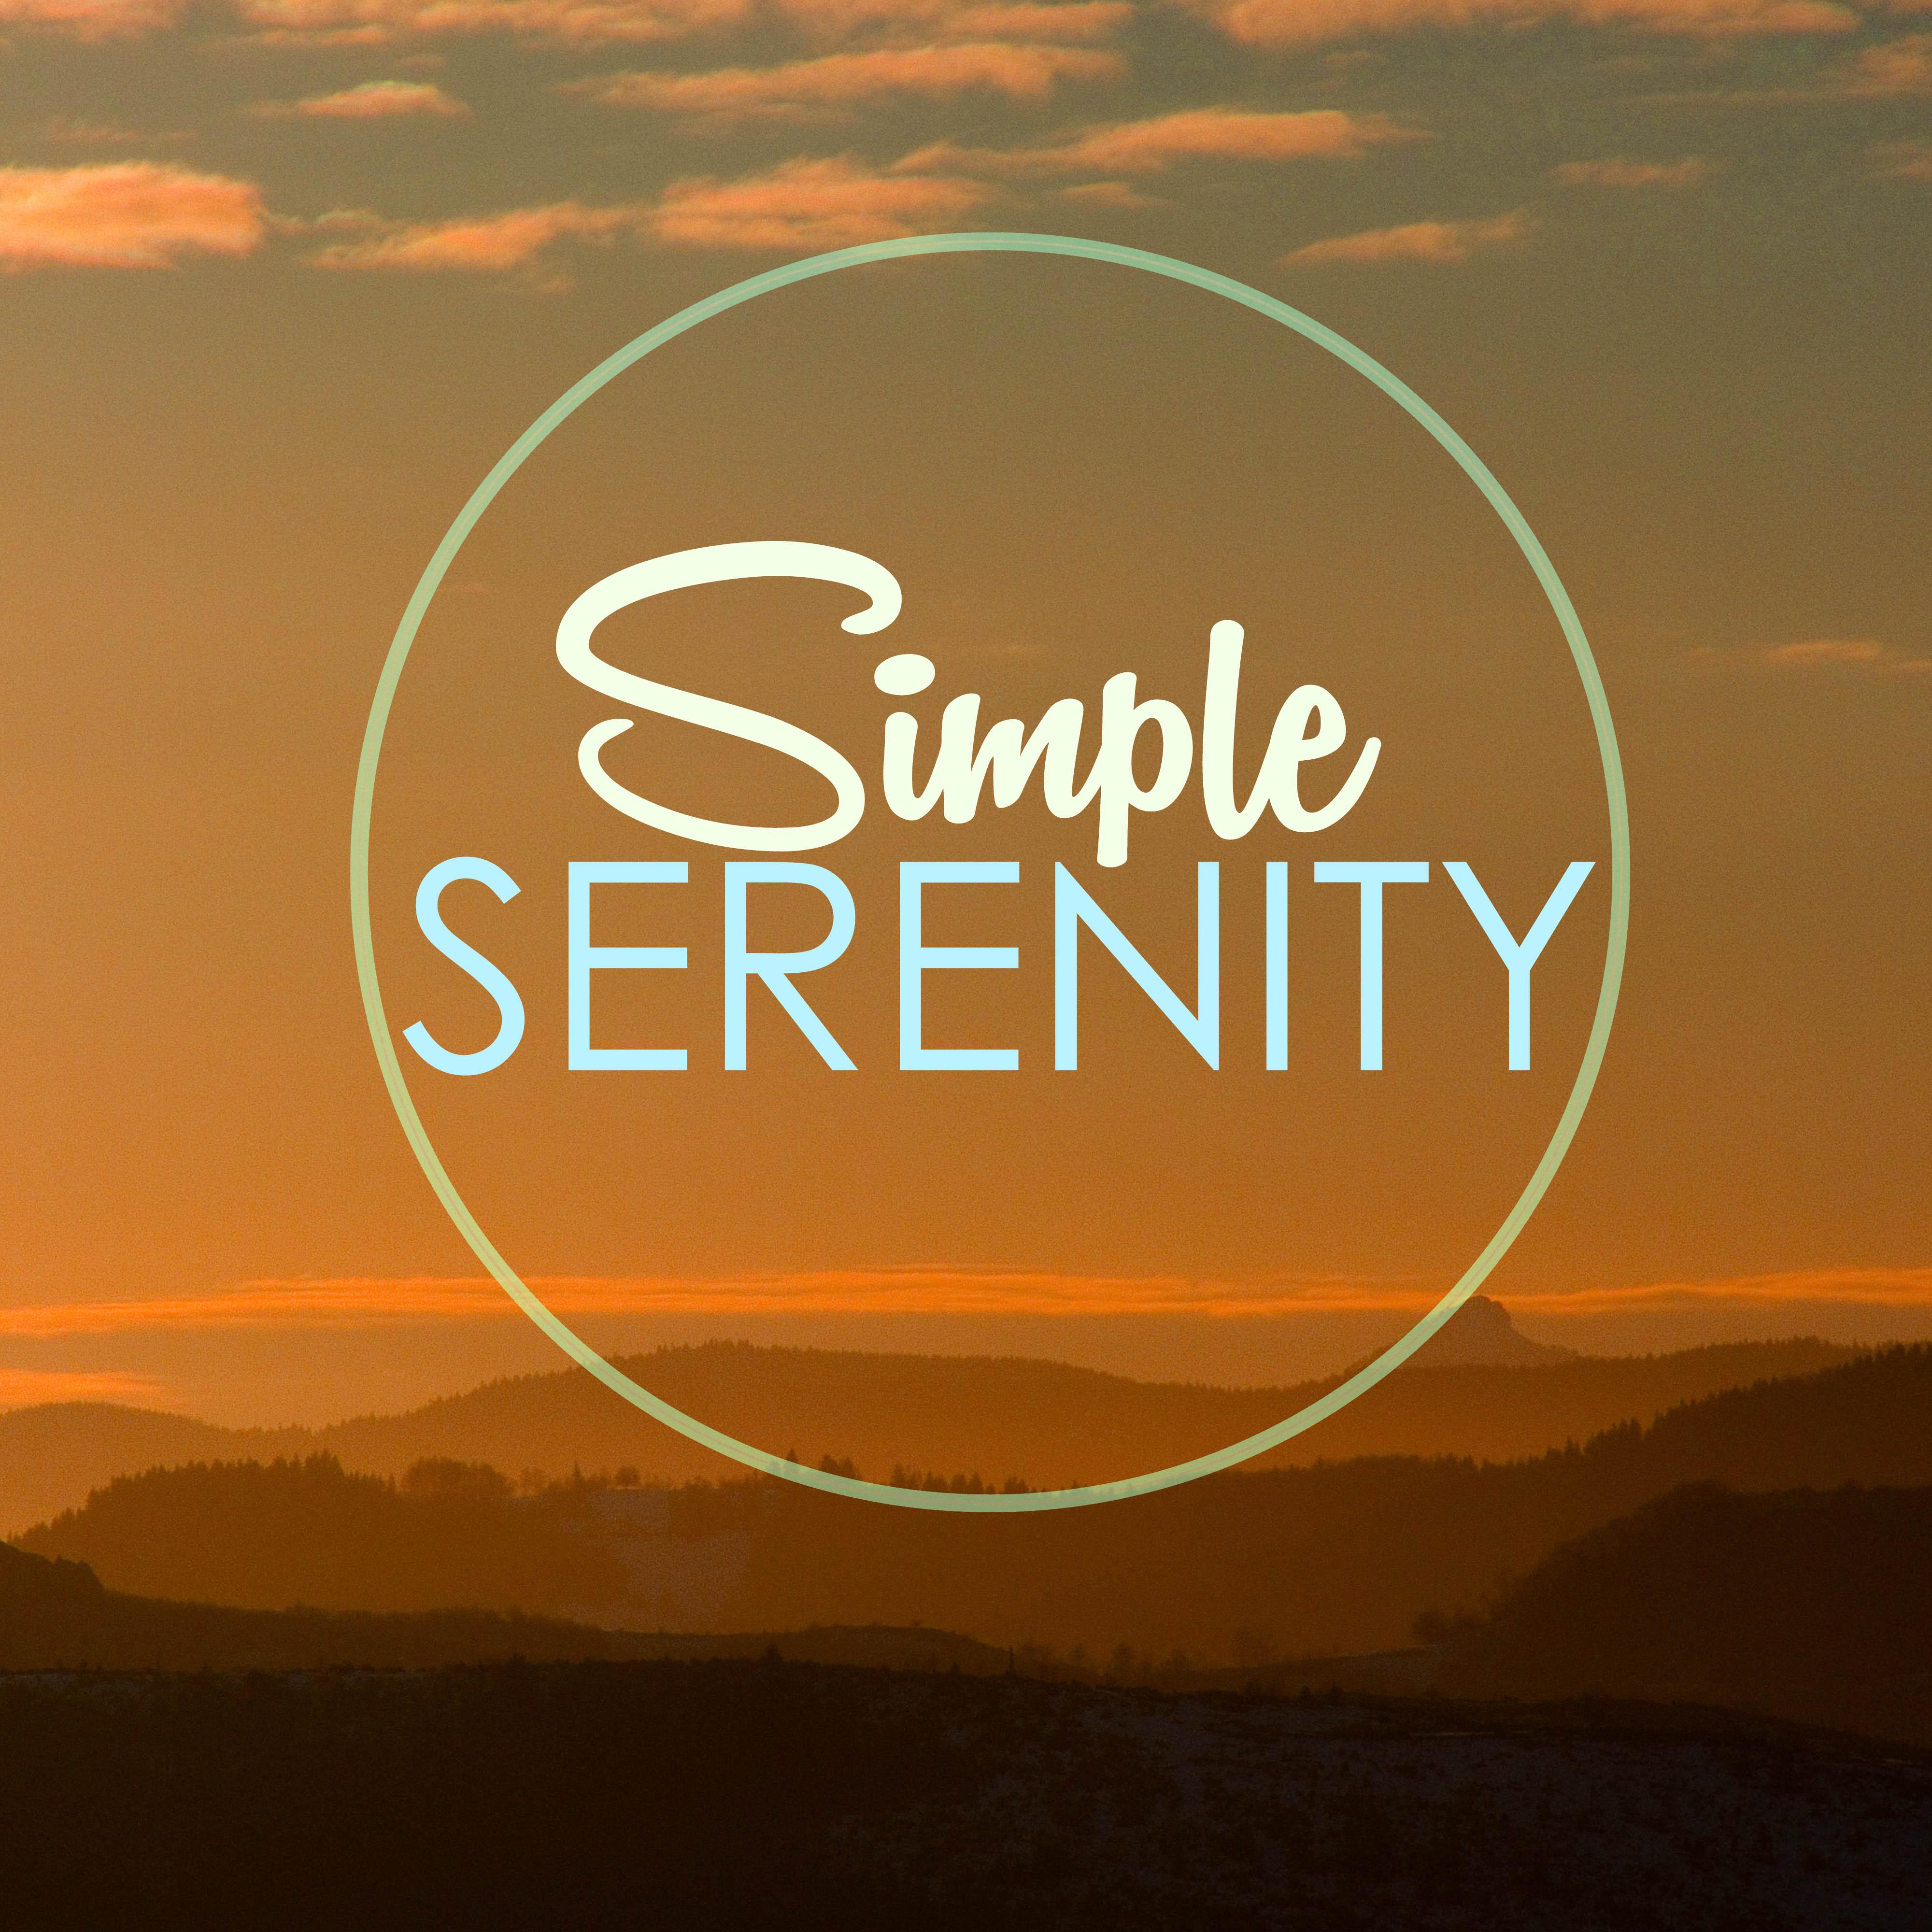 Simple Serenity - Spa Music for Relaxation, Relaxing Deep Sleep Meditation, Healing Massage, Piano Moods and Sounds of Nature for Sound Therapy, Studying, Chakra Balancing, Baby Sleep & Yoga